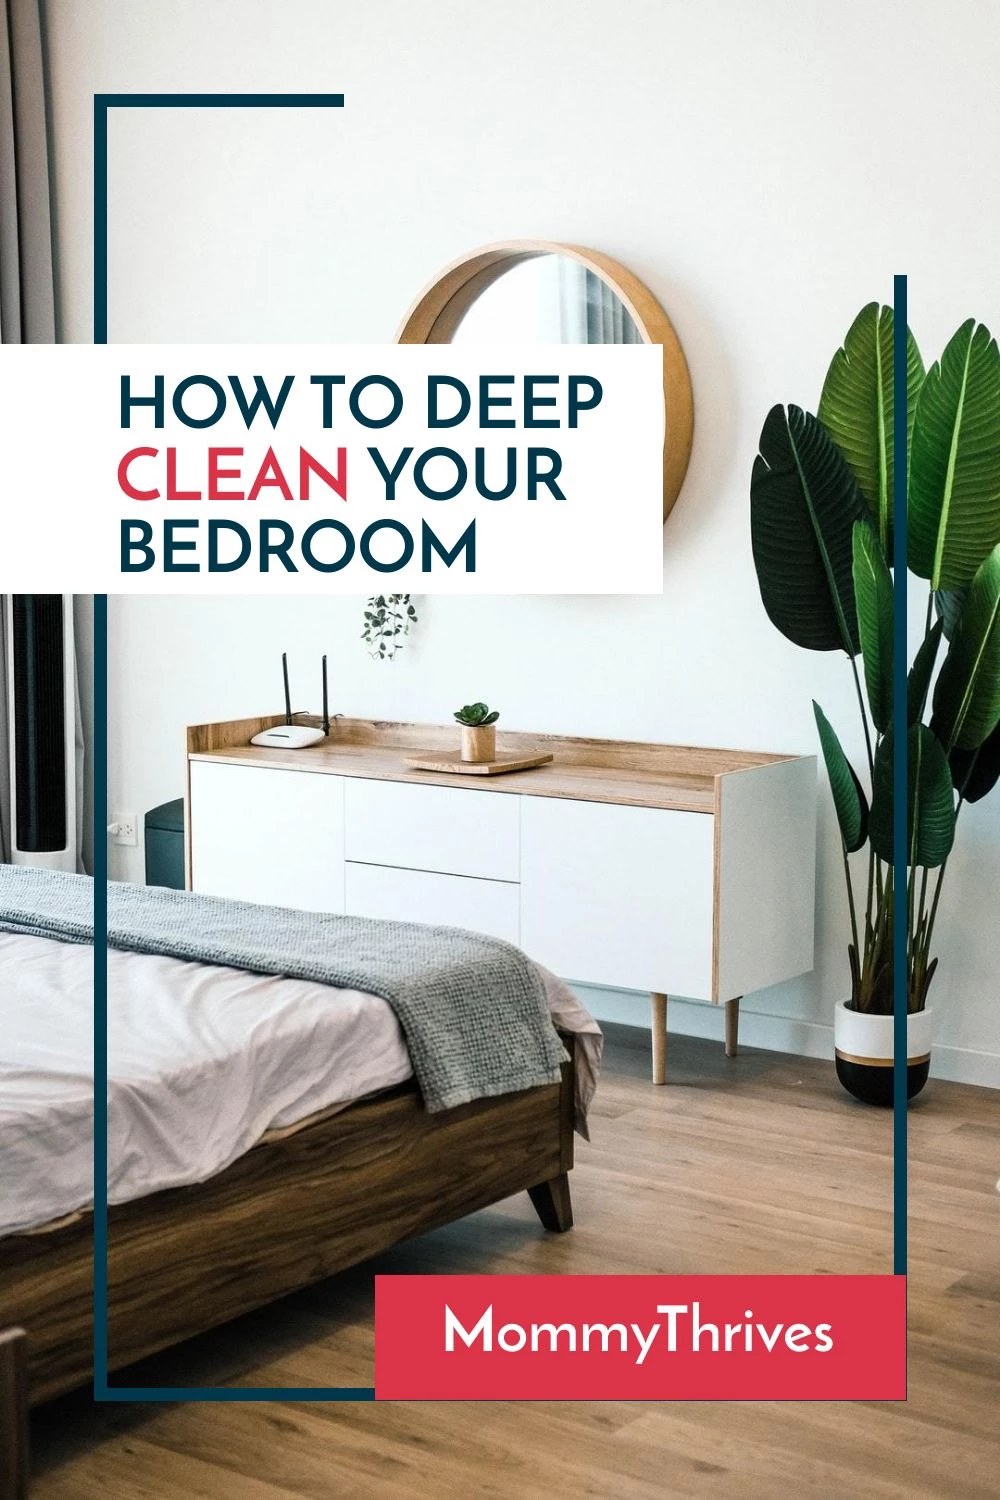 Bedroom Cleaning Checklist - How To Deep Clean A Bedroom - Cleaning Tips and Tricks For Bedrooms